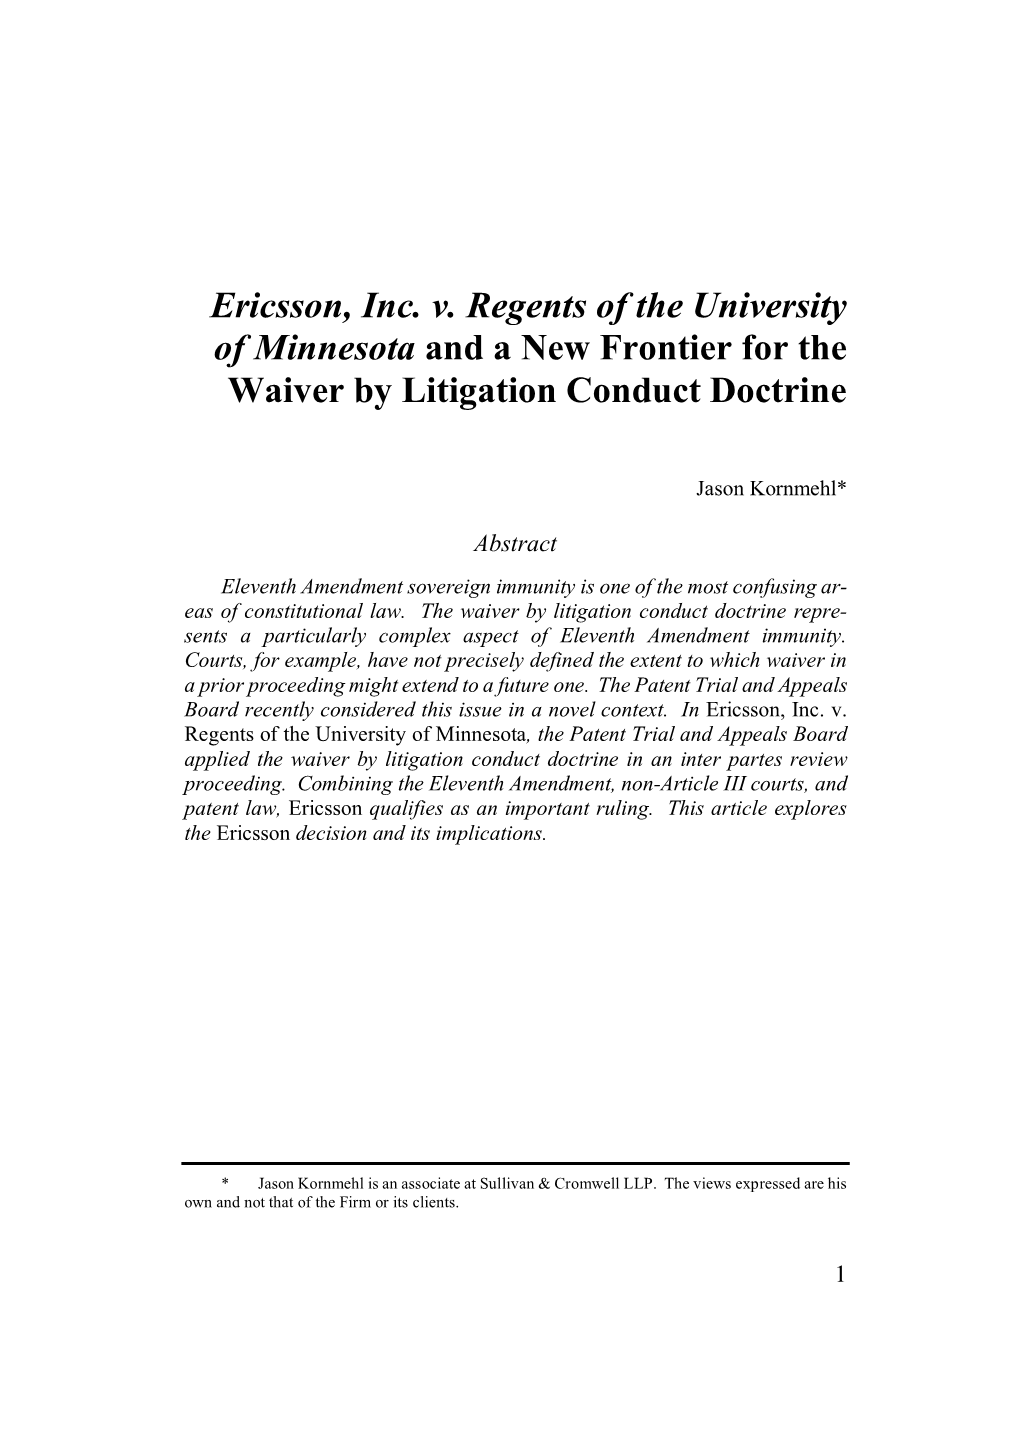 Ericsson, Inc. V. Regents of the University of Minnesota and a New Frontier for the Waiver by Litigation Conduct Doctrine